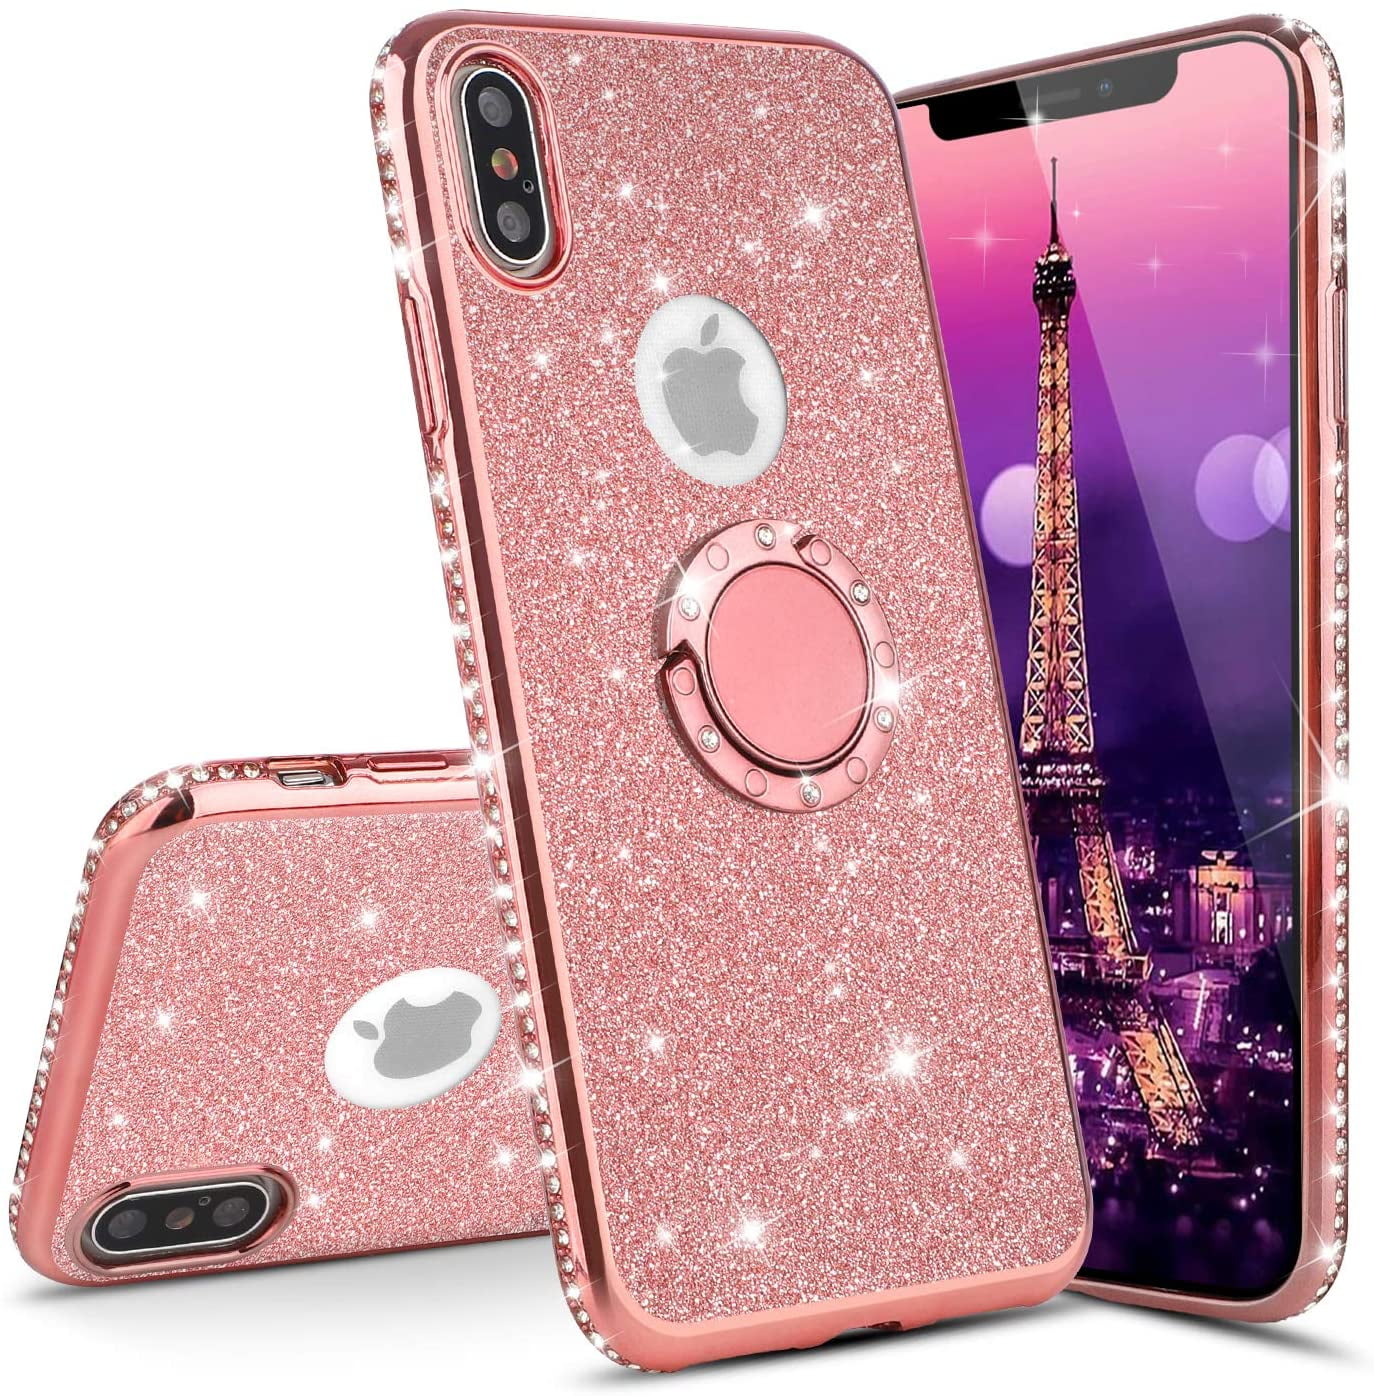 LEECOCO Samsung A10 Case Glitter Bling Diamond Sparkly Luxury Plating ...